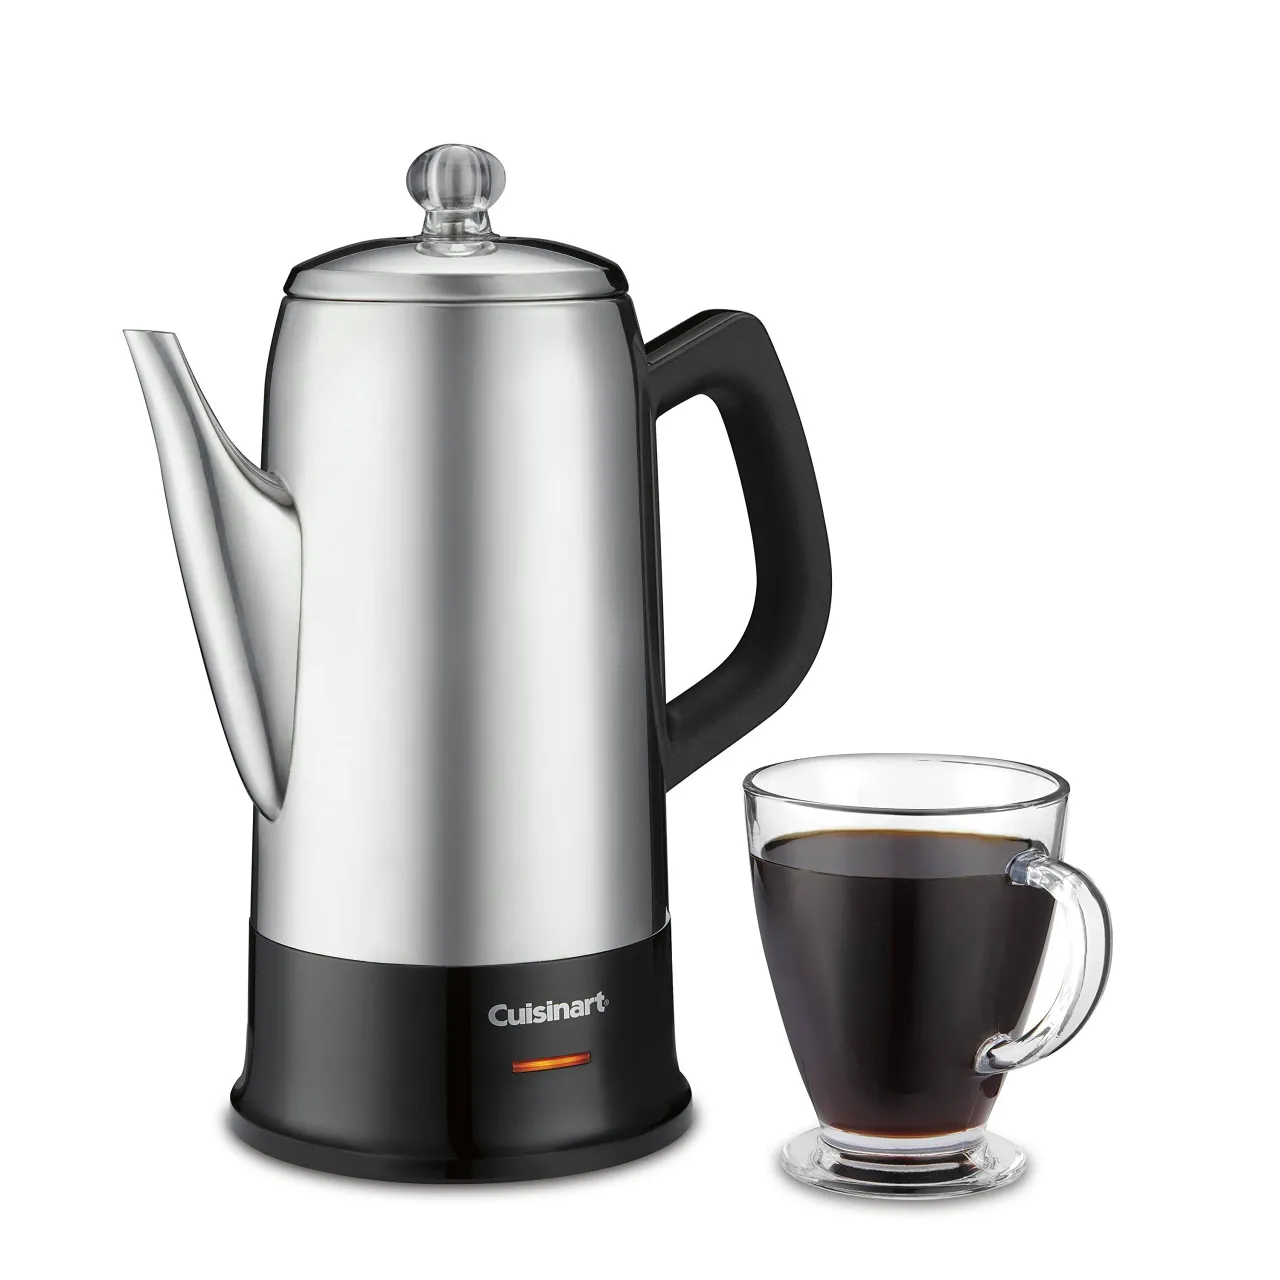 7 Classic Stainless-Steel Percolator by Cuisinart, with a 12-Cup Capacity and a sleek Black/Stainless Finish.